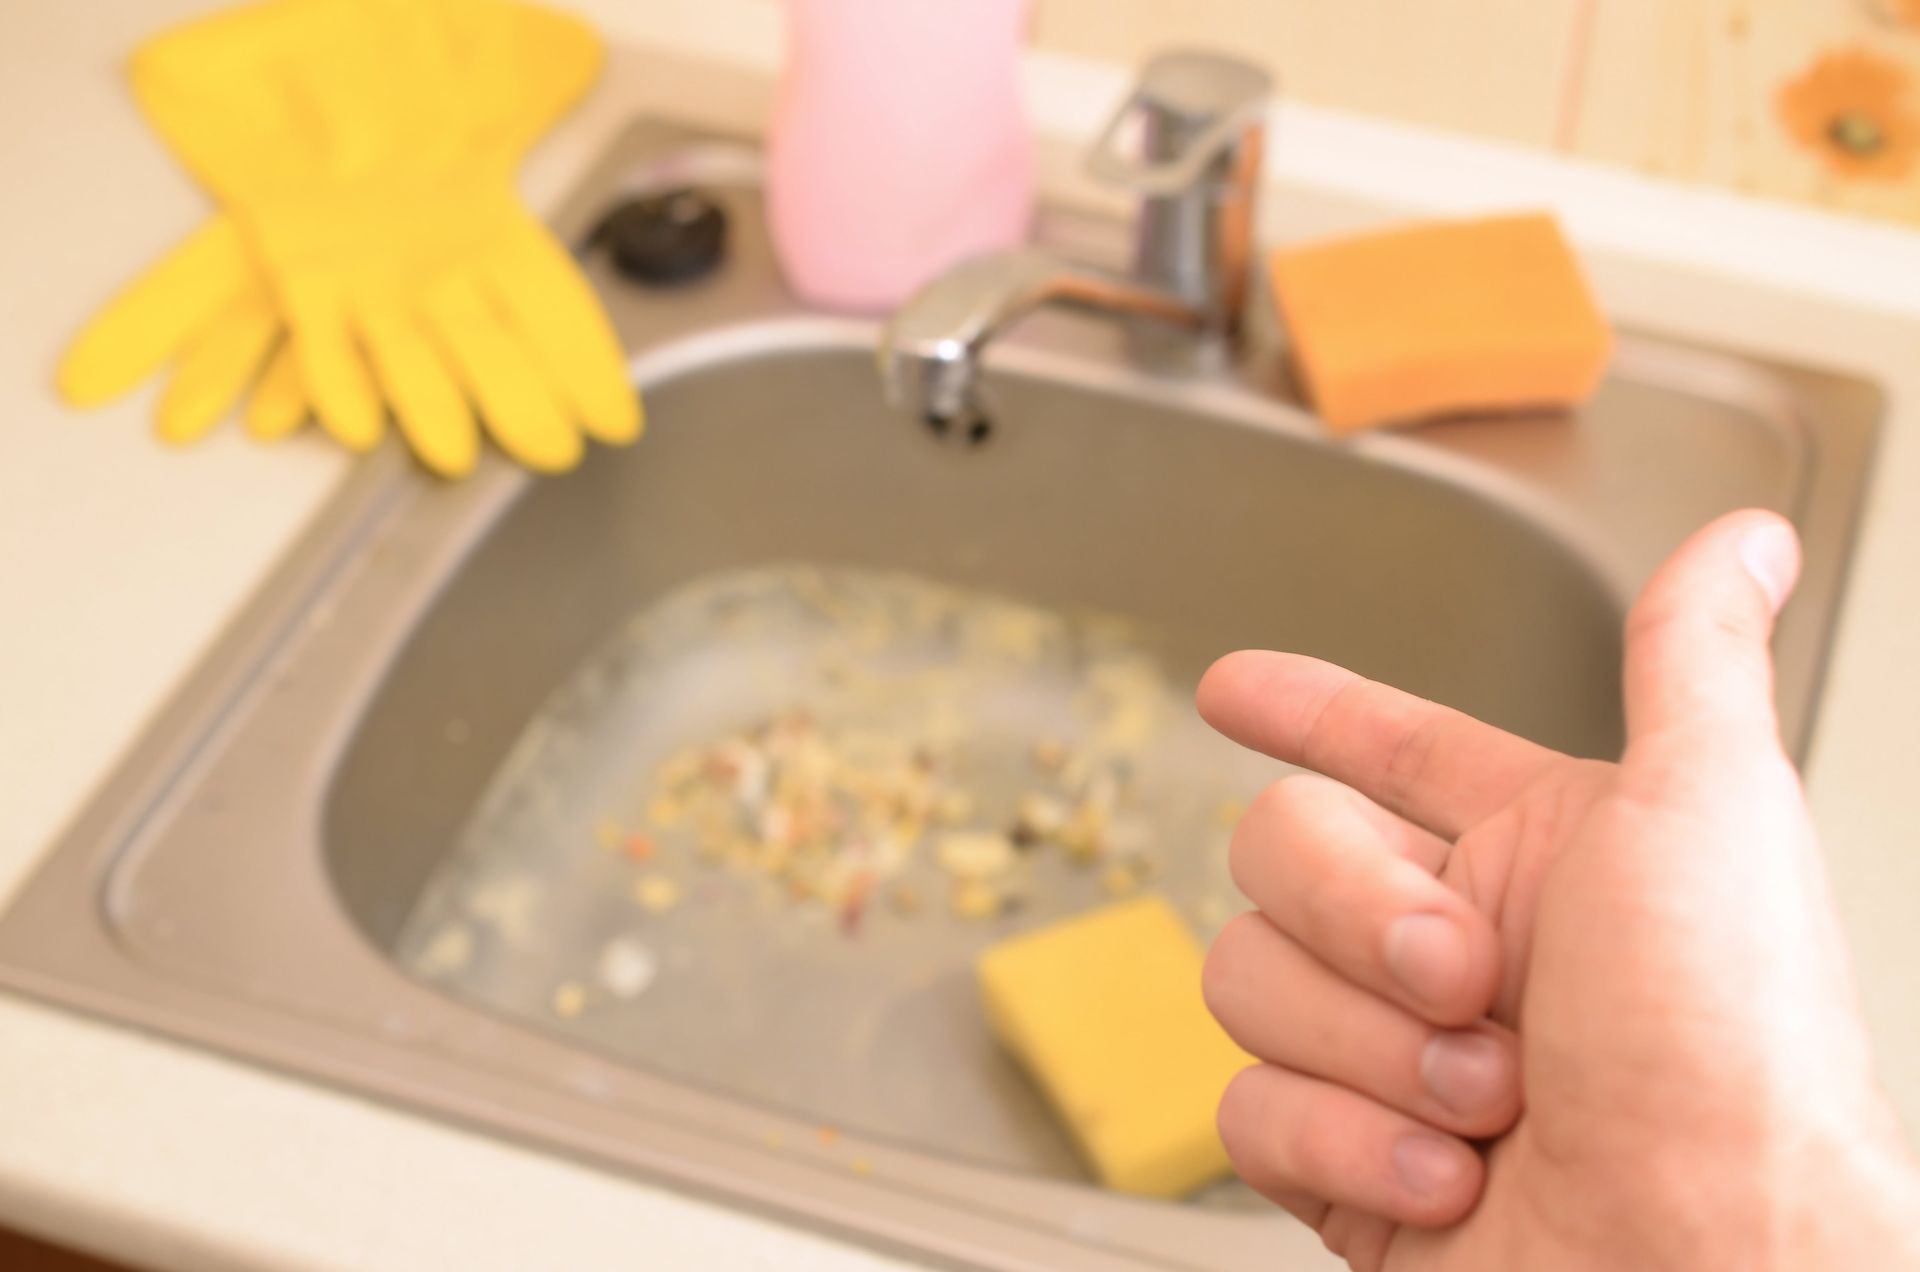 Can Drain Cleaner Be Used in a Garbage Disposal?